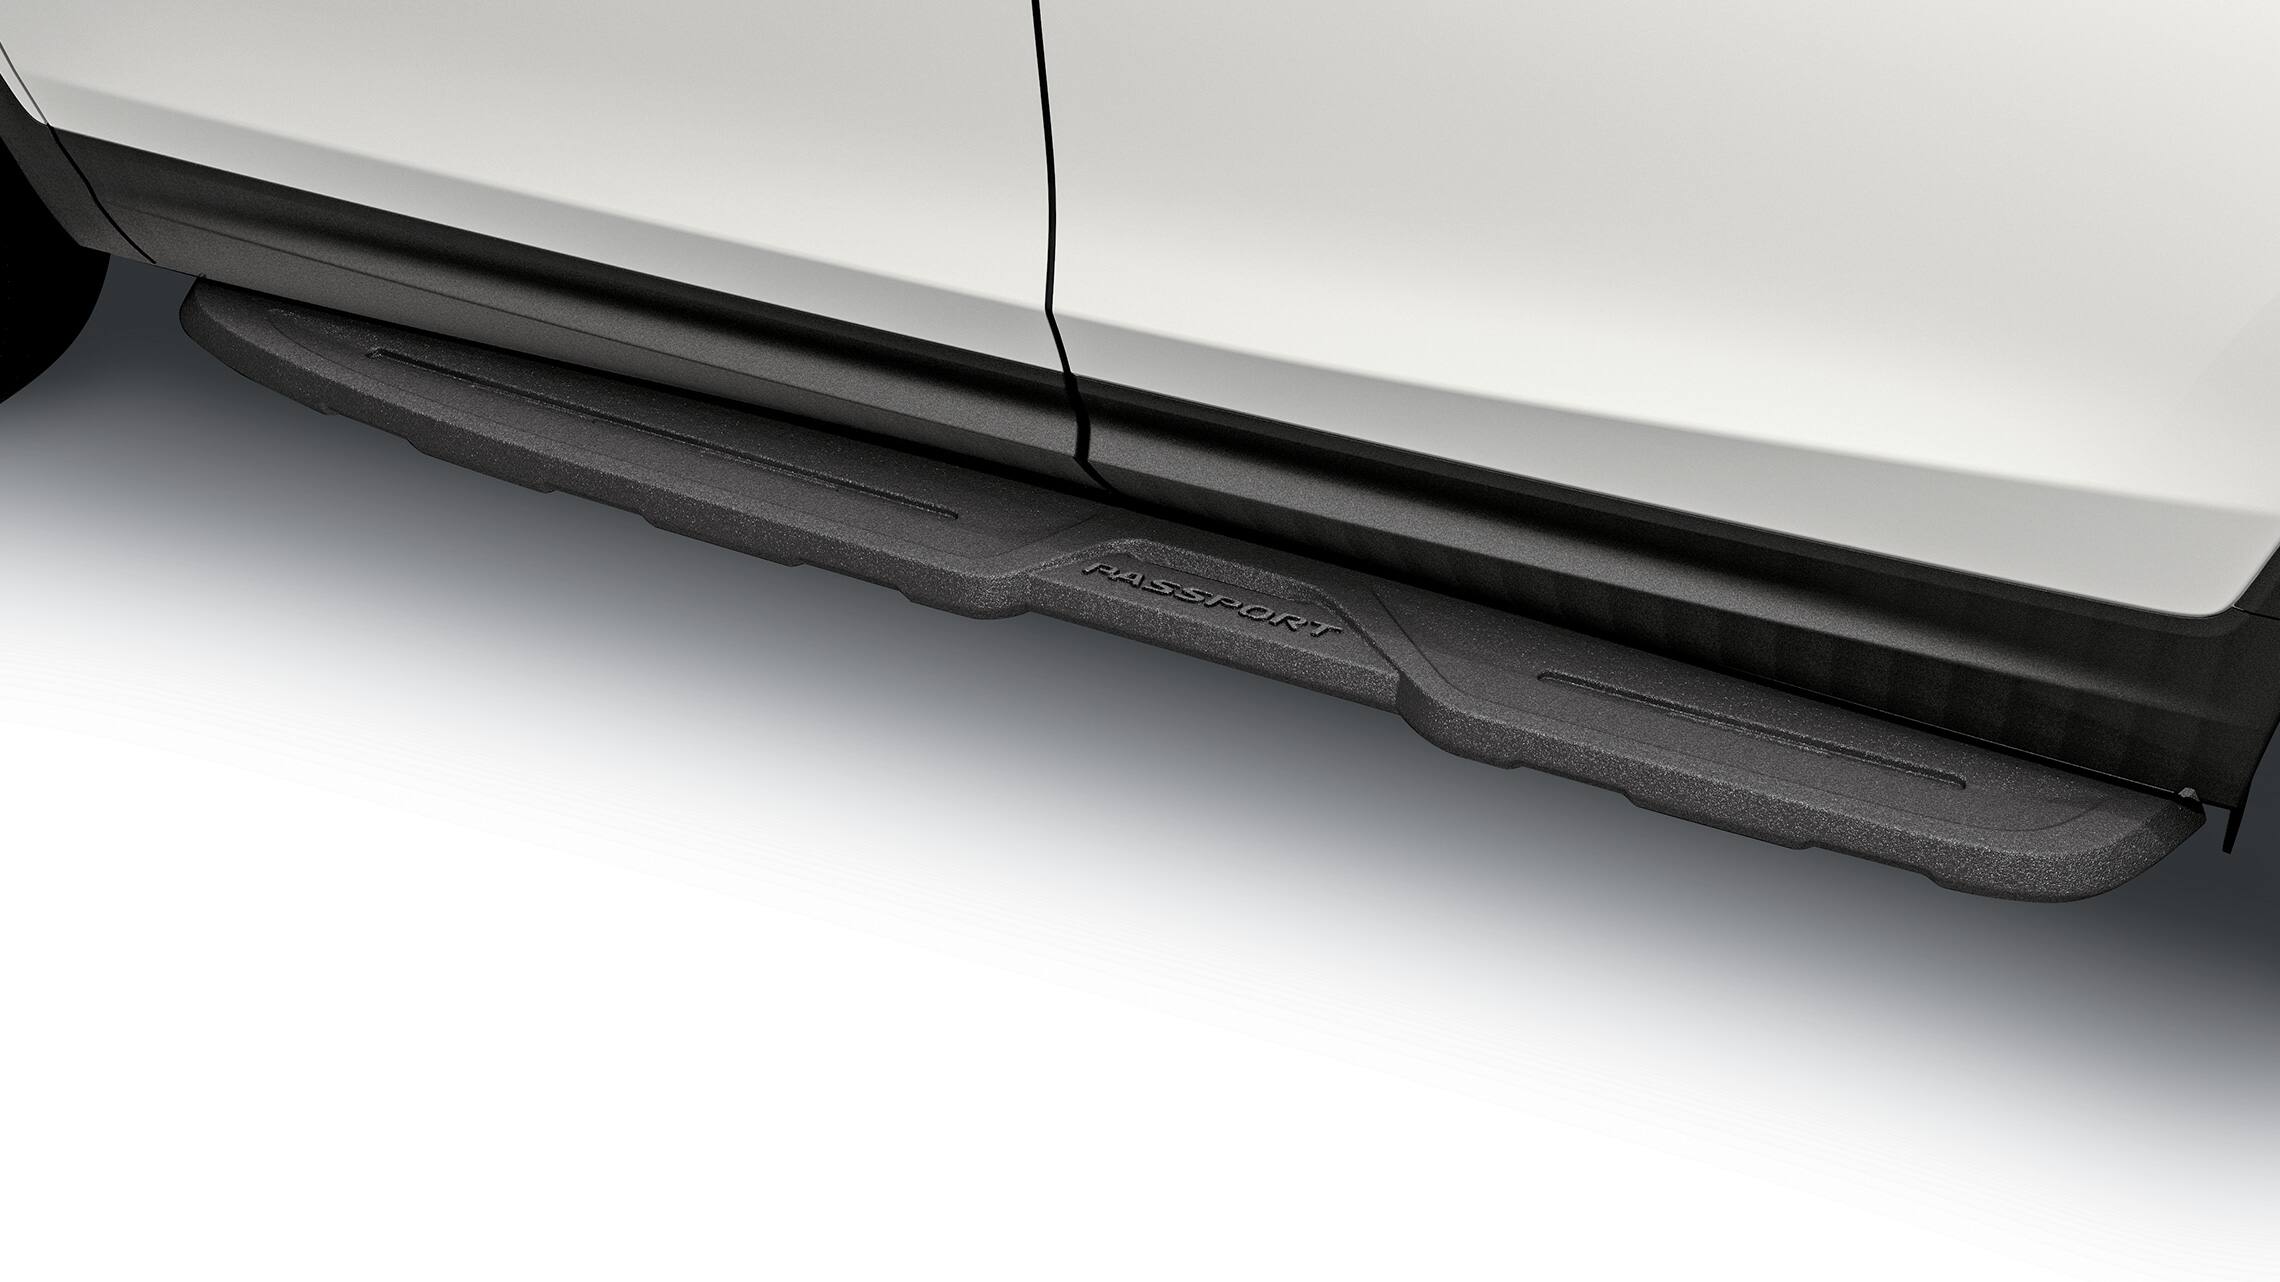 Detail of accessory die-cast running board on the 2019 Honda Passport.